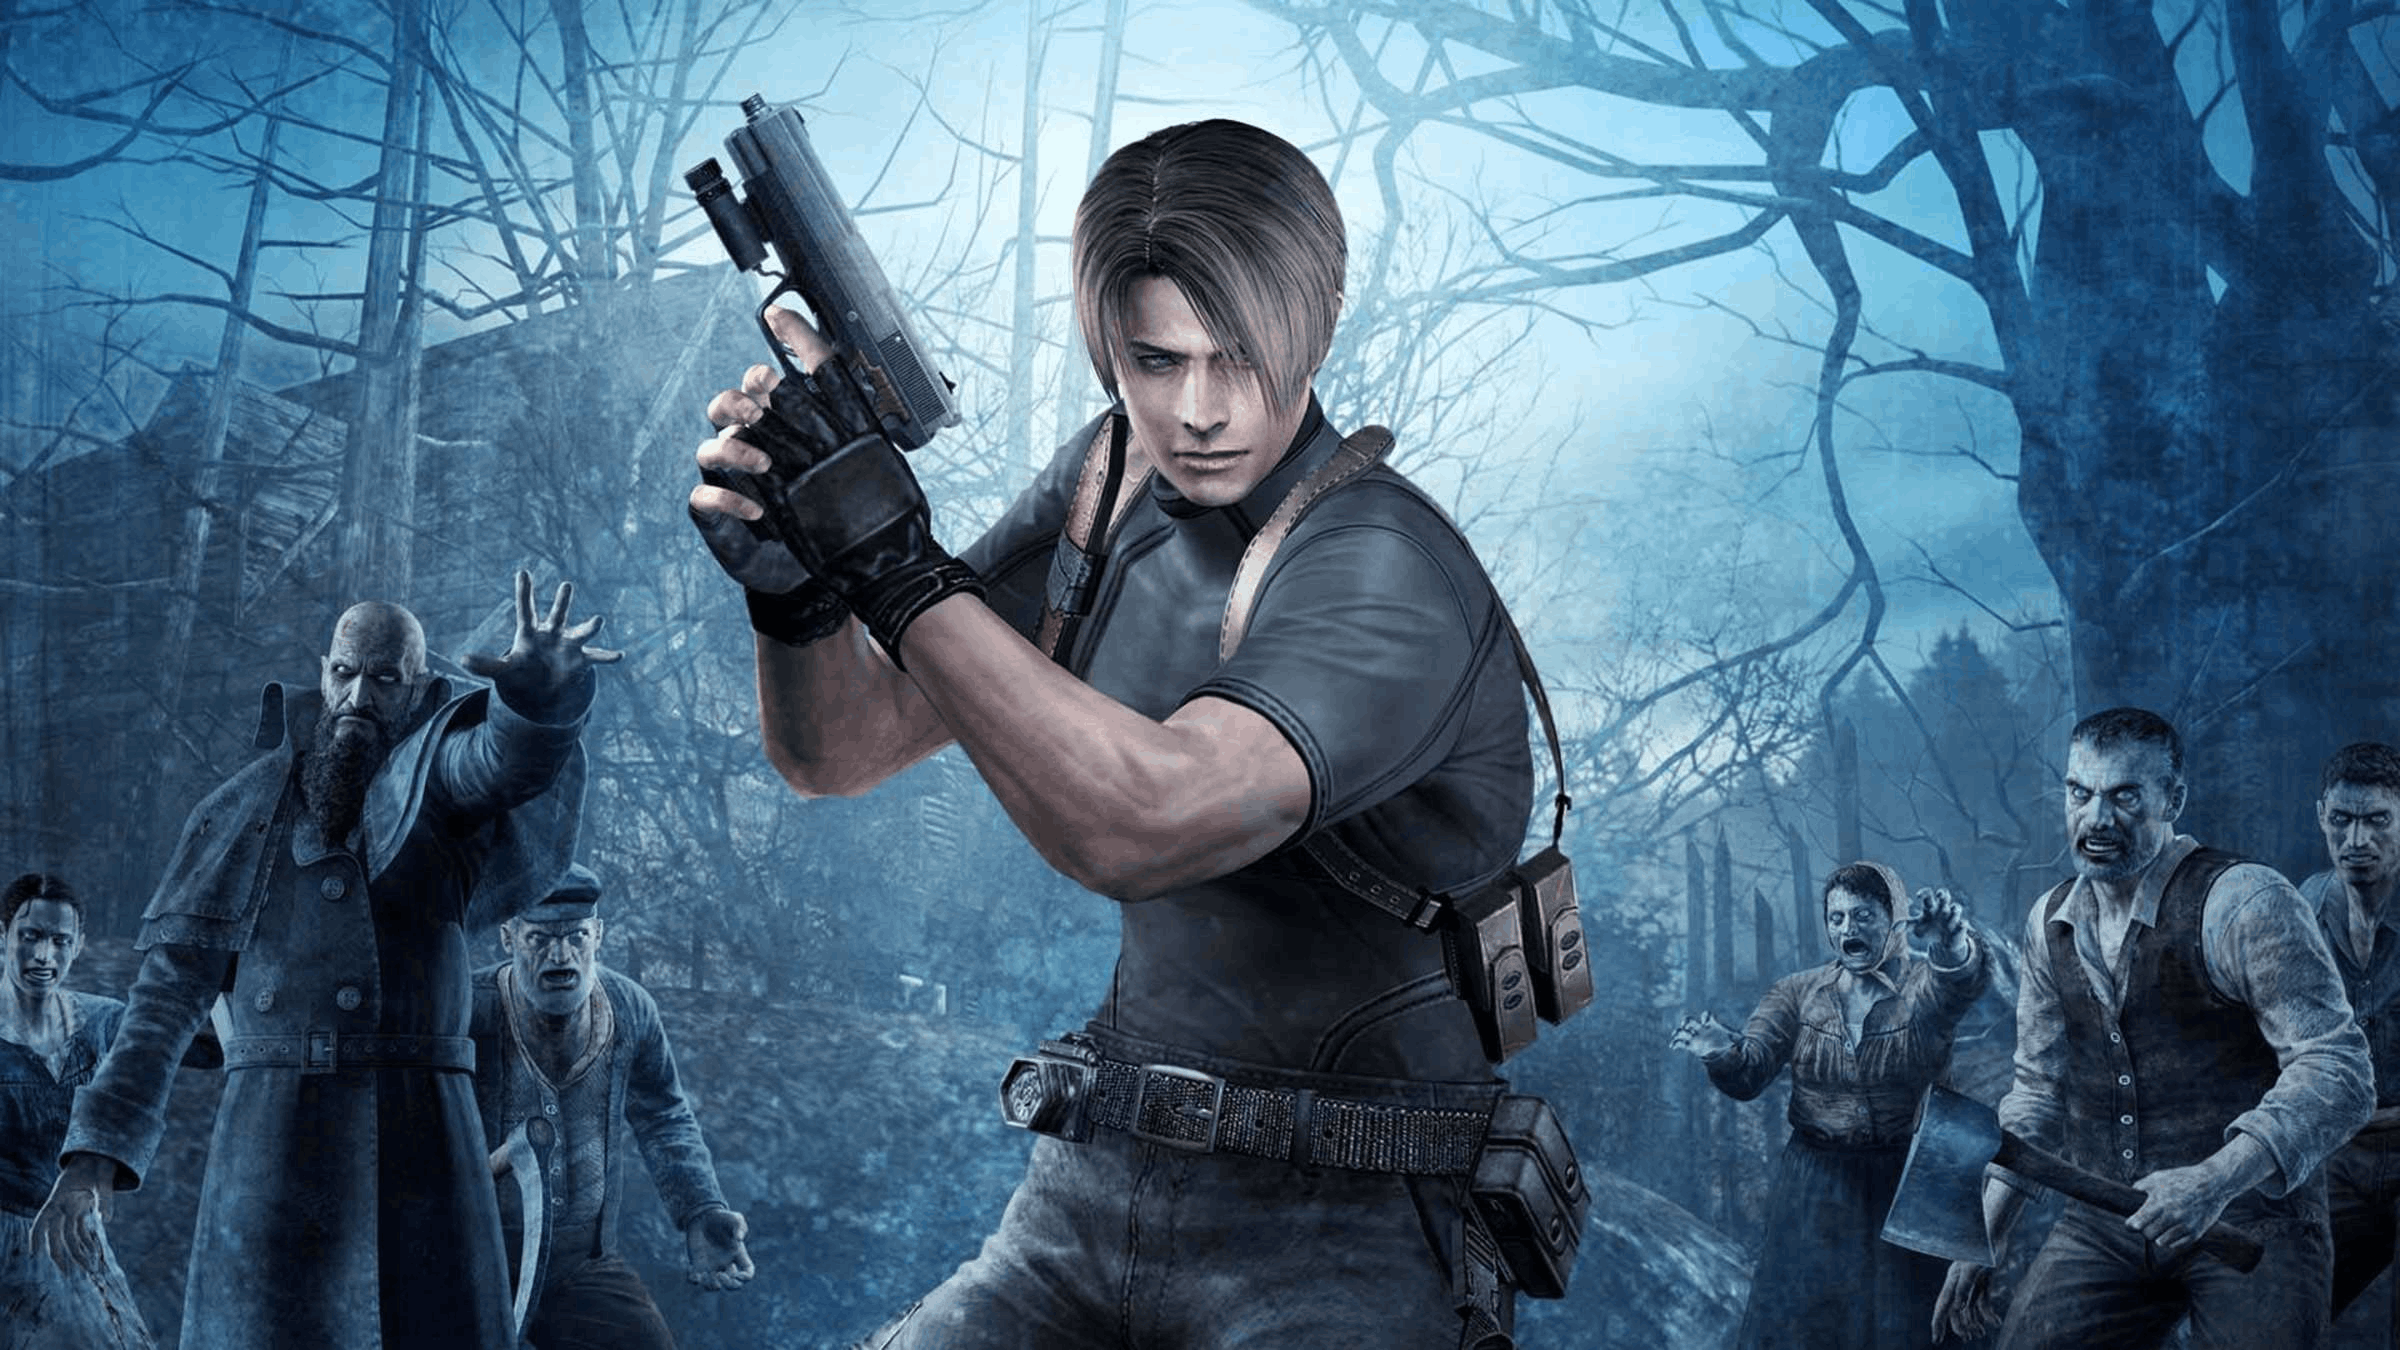 RESIDENT EVIL: ANNOUNCEMENT ON FEBRUARY 15, IS OFFICIAL